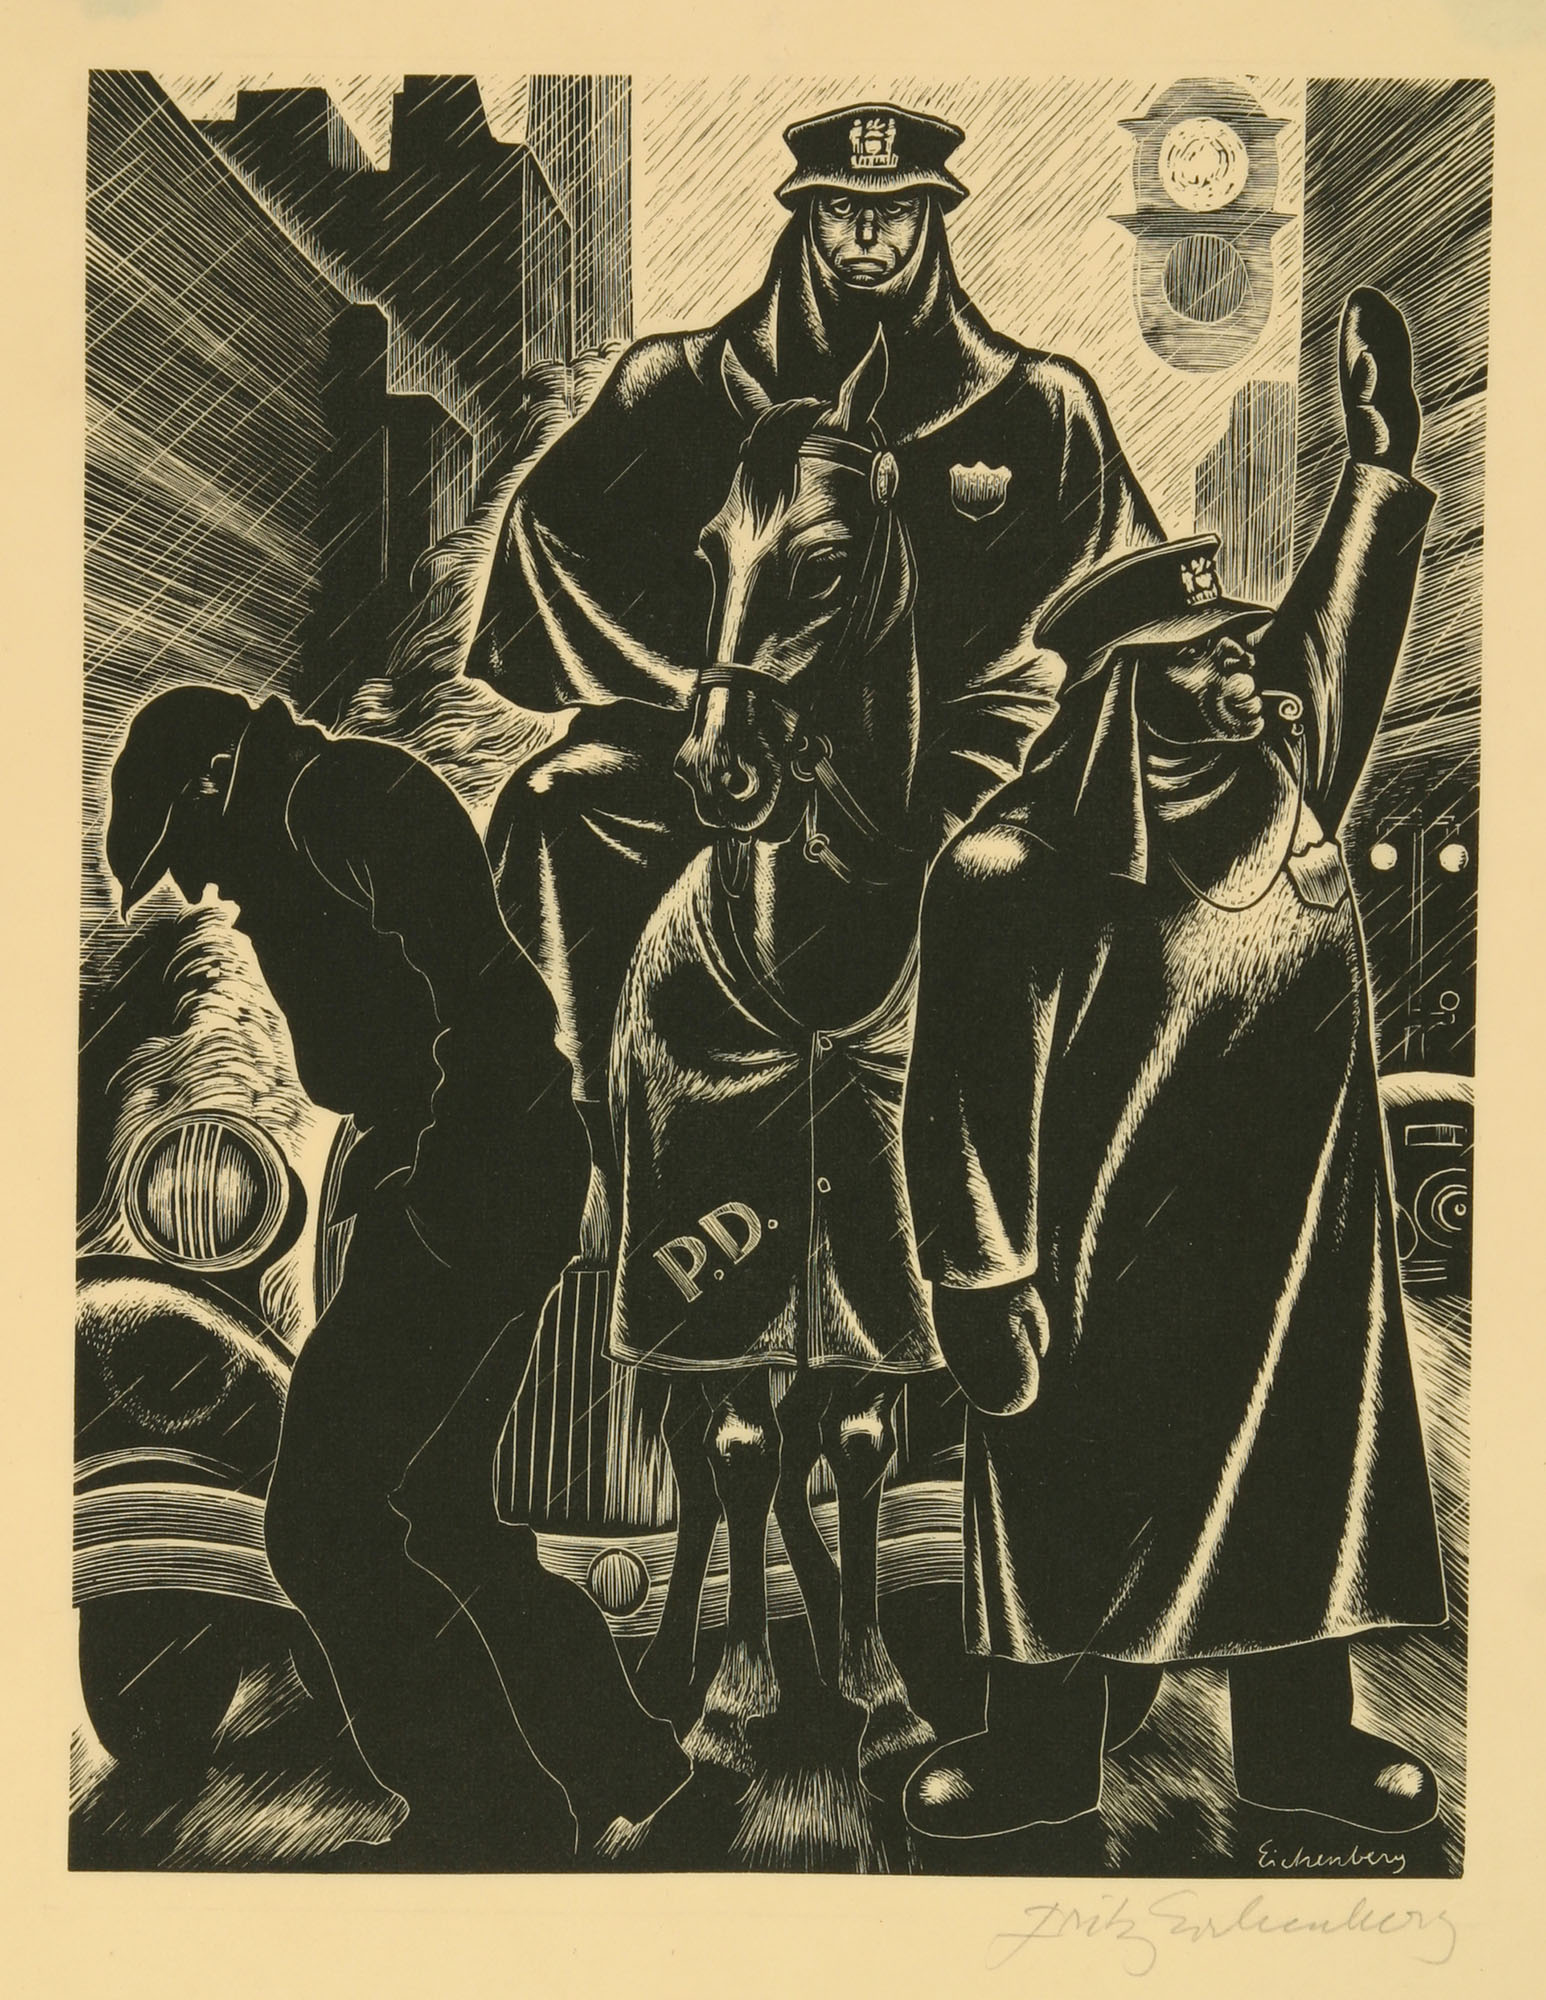 Fritz Eichenberg, April Showers, 1935. Wood engraving on paper. Collection of DePaul Art Museum, gift of Belverd and Marian Powers Needles.